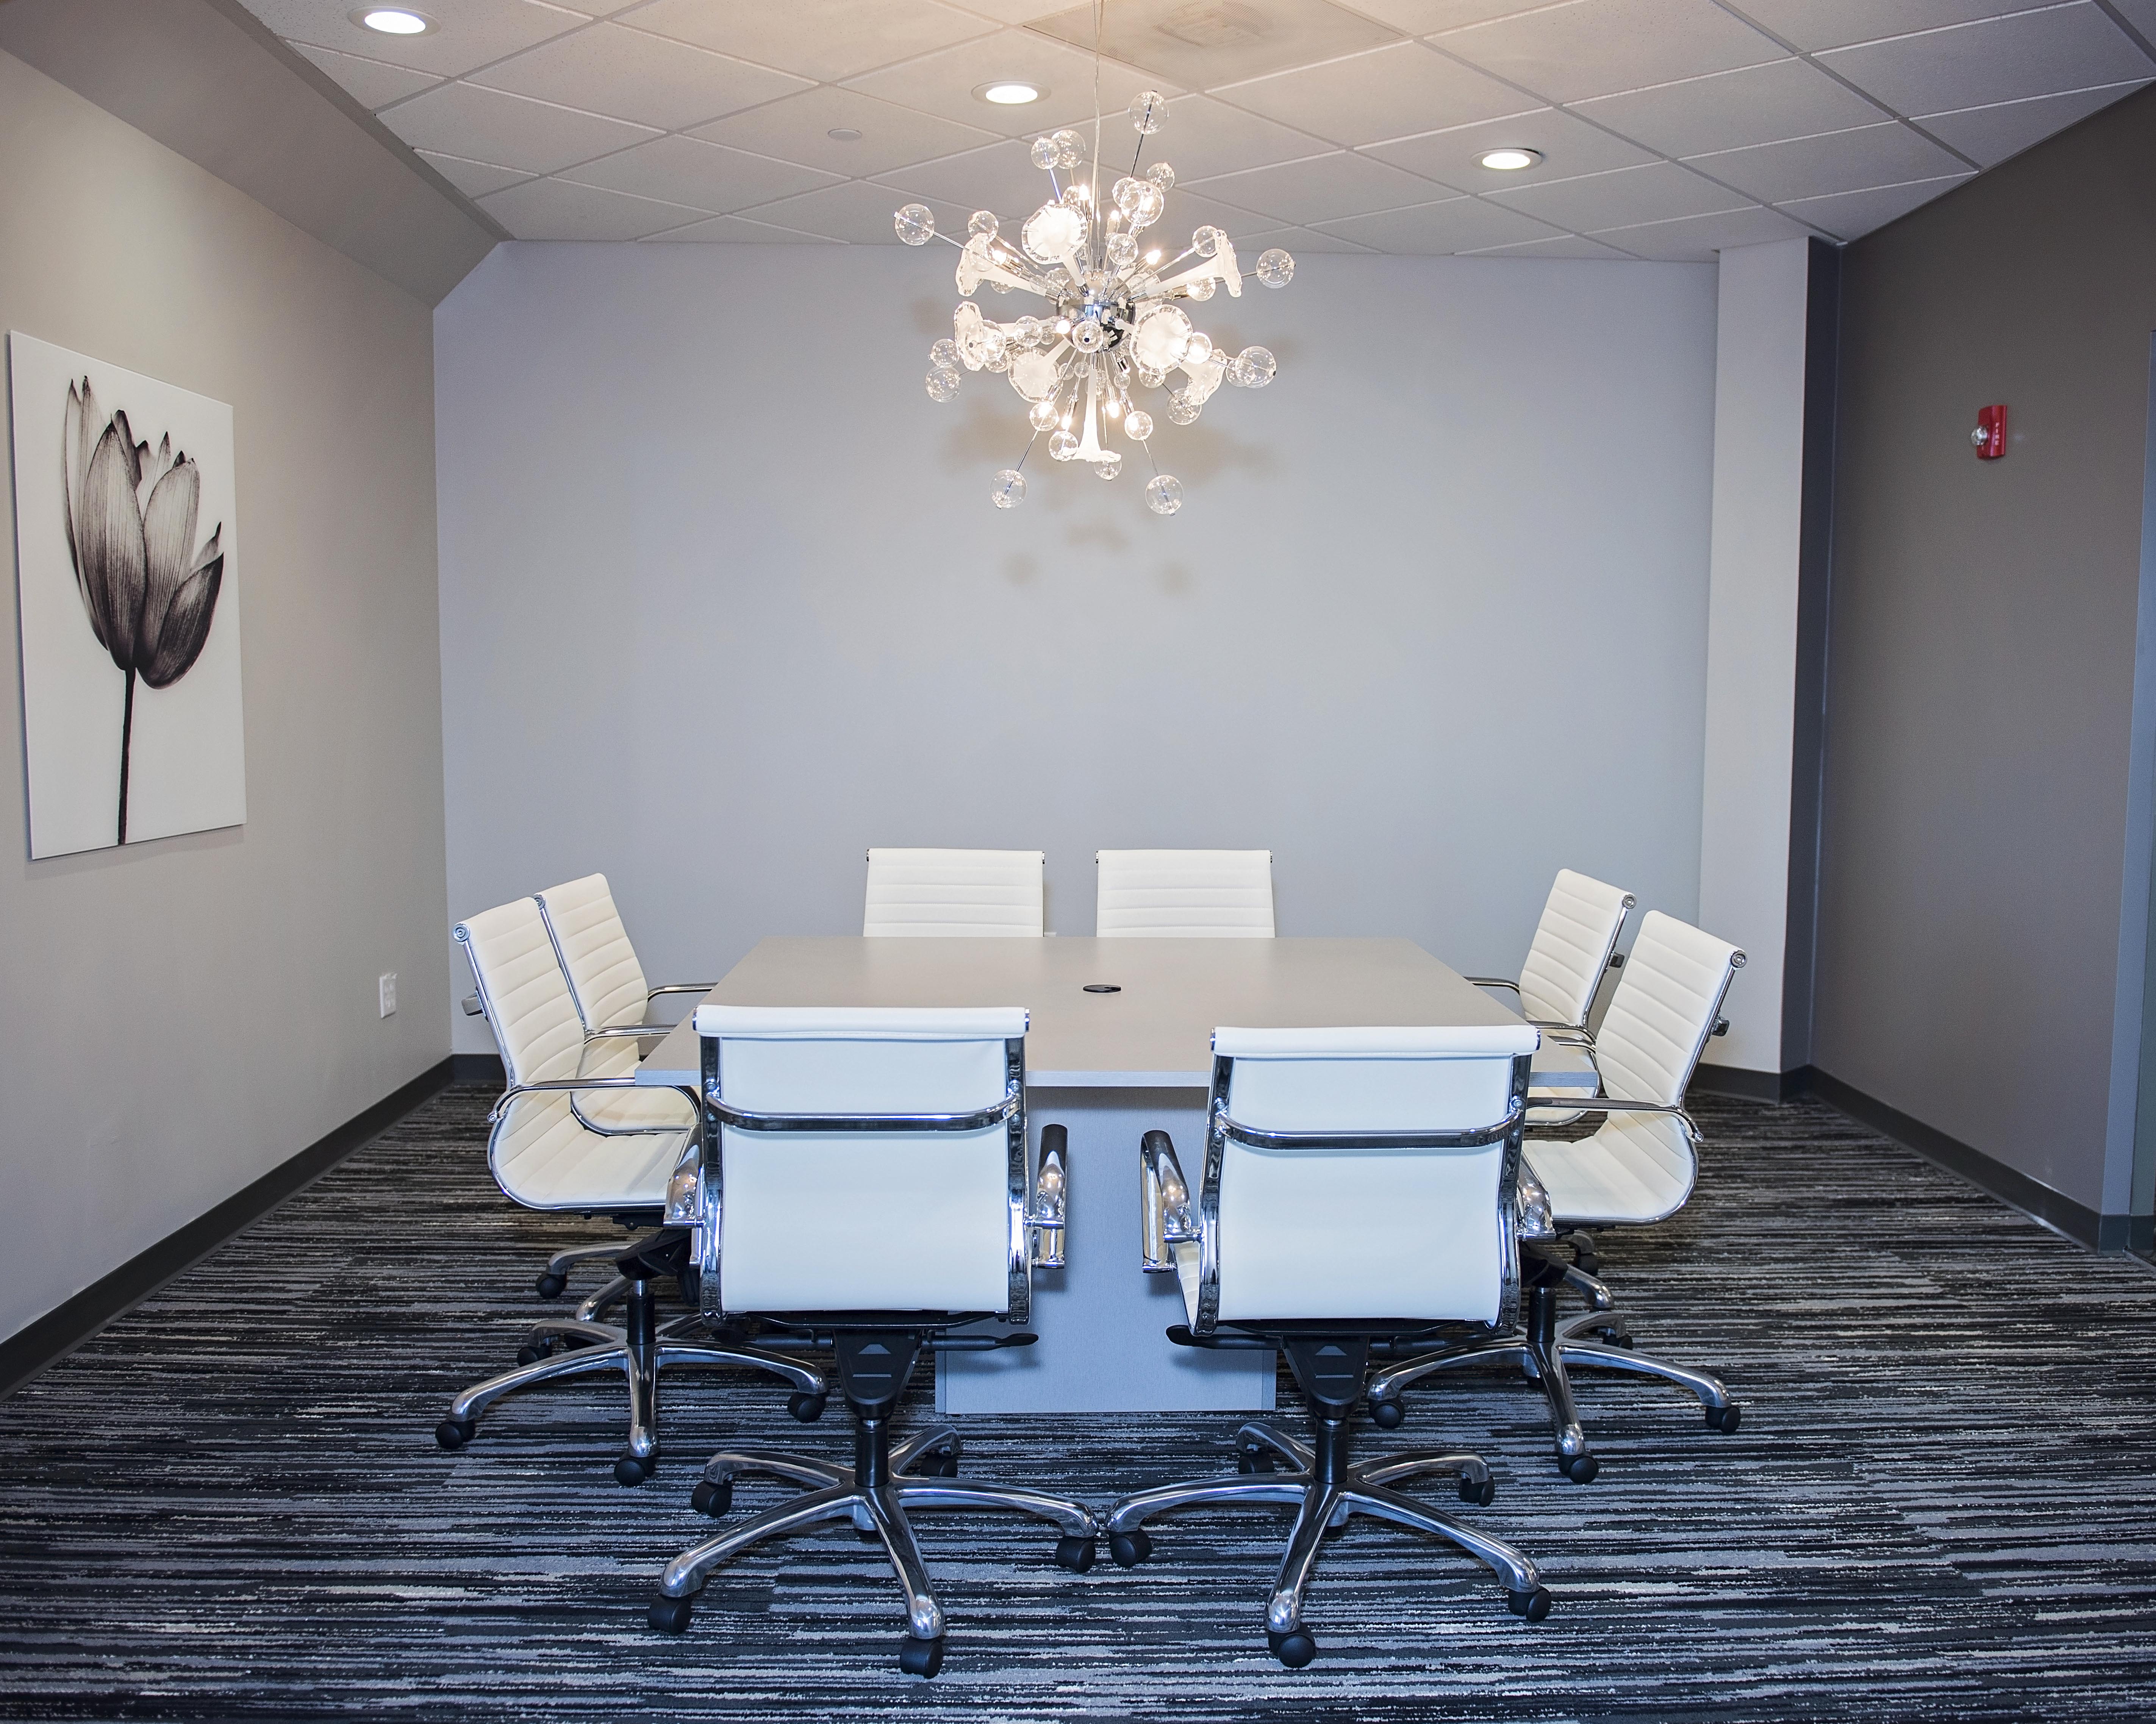 Clean and modern meeting area